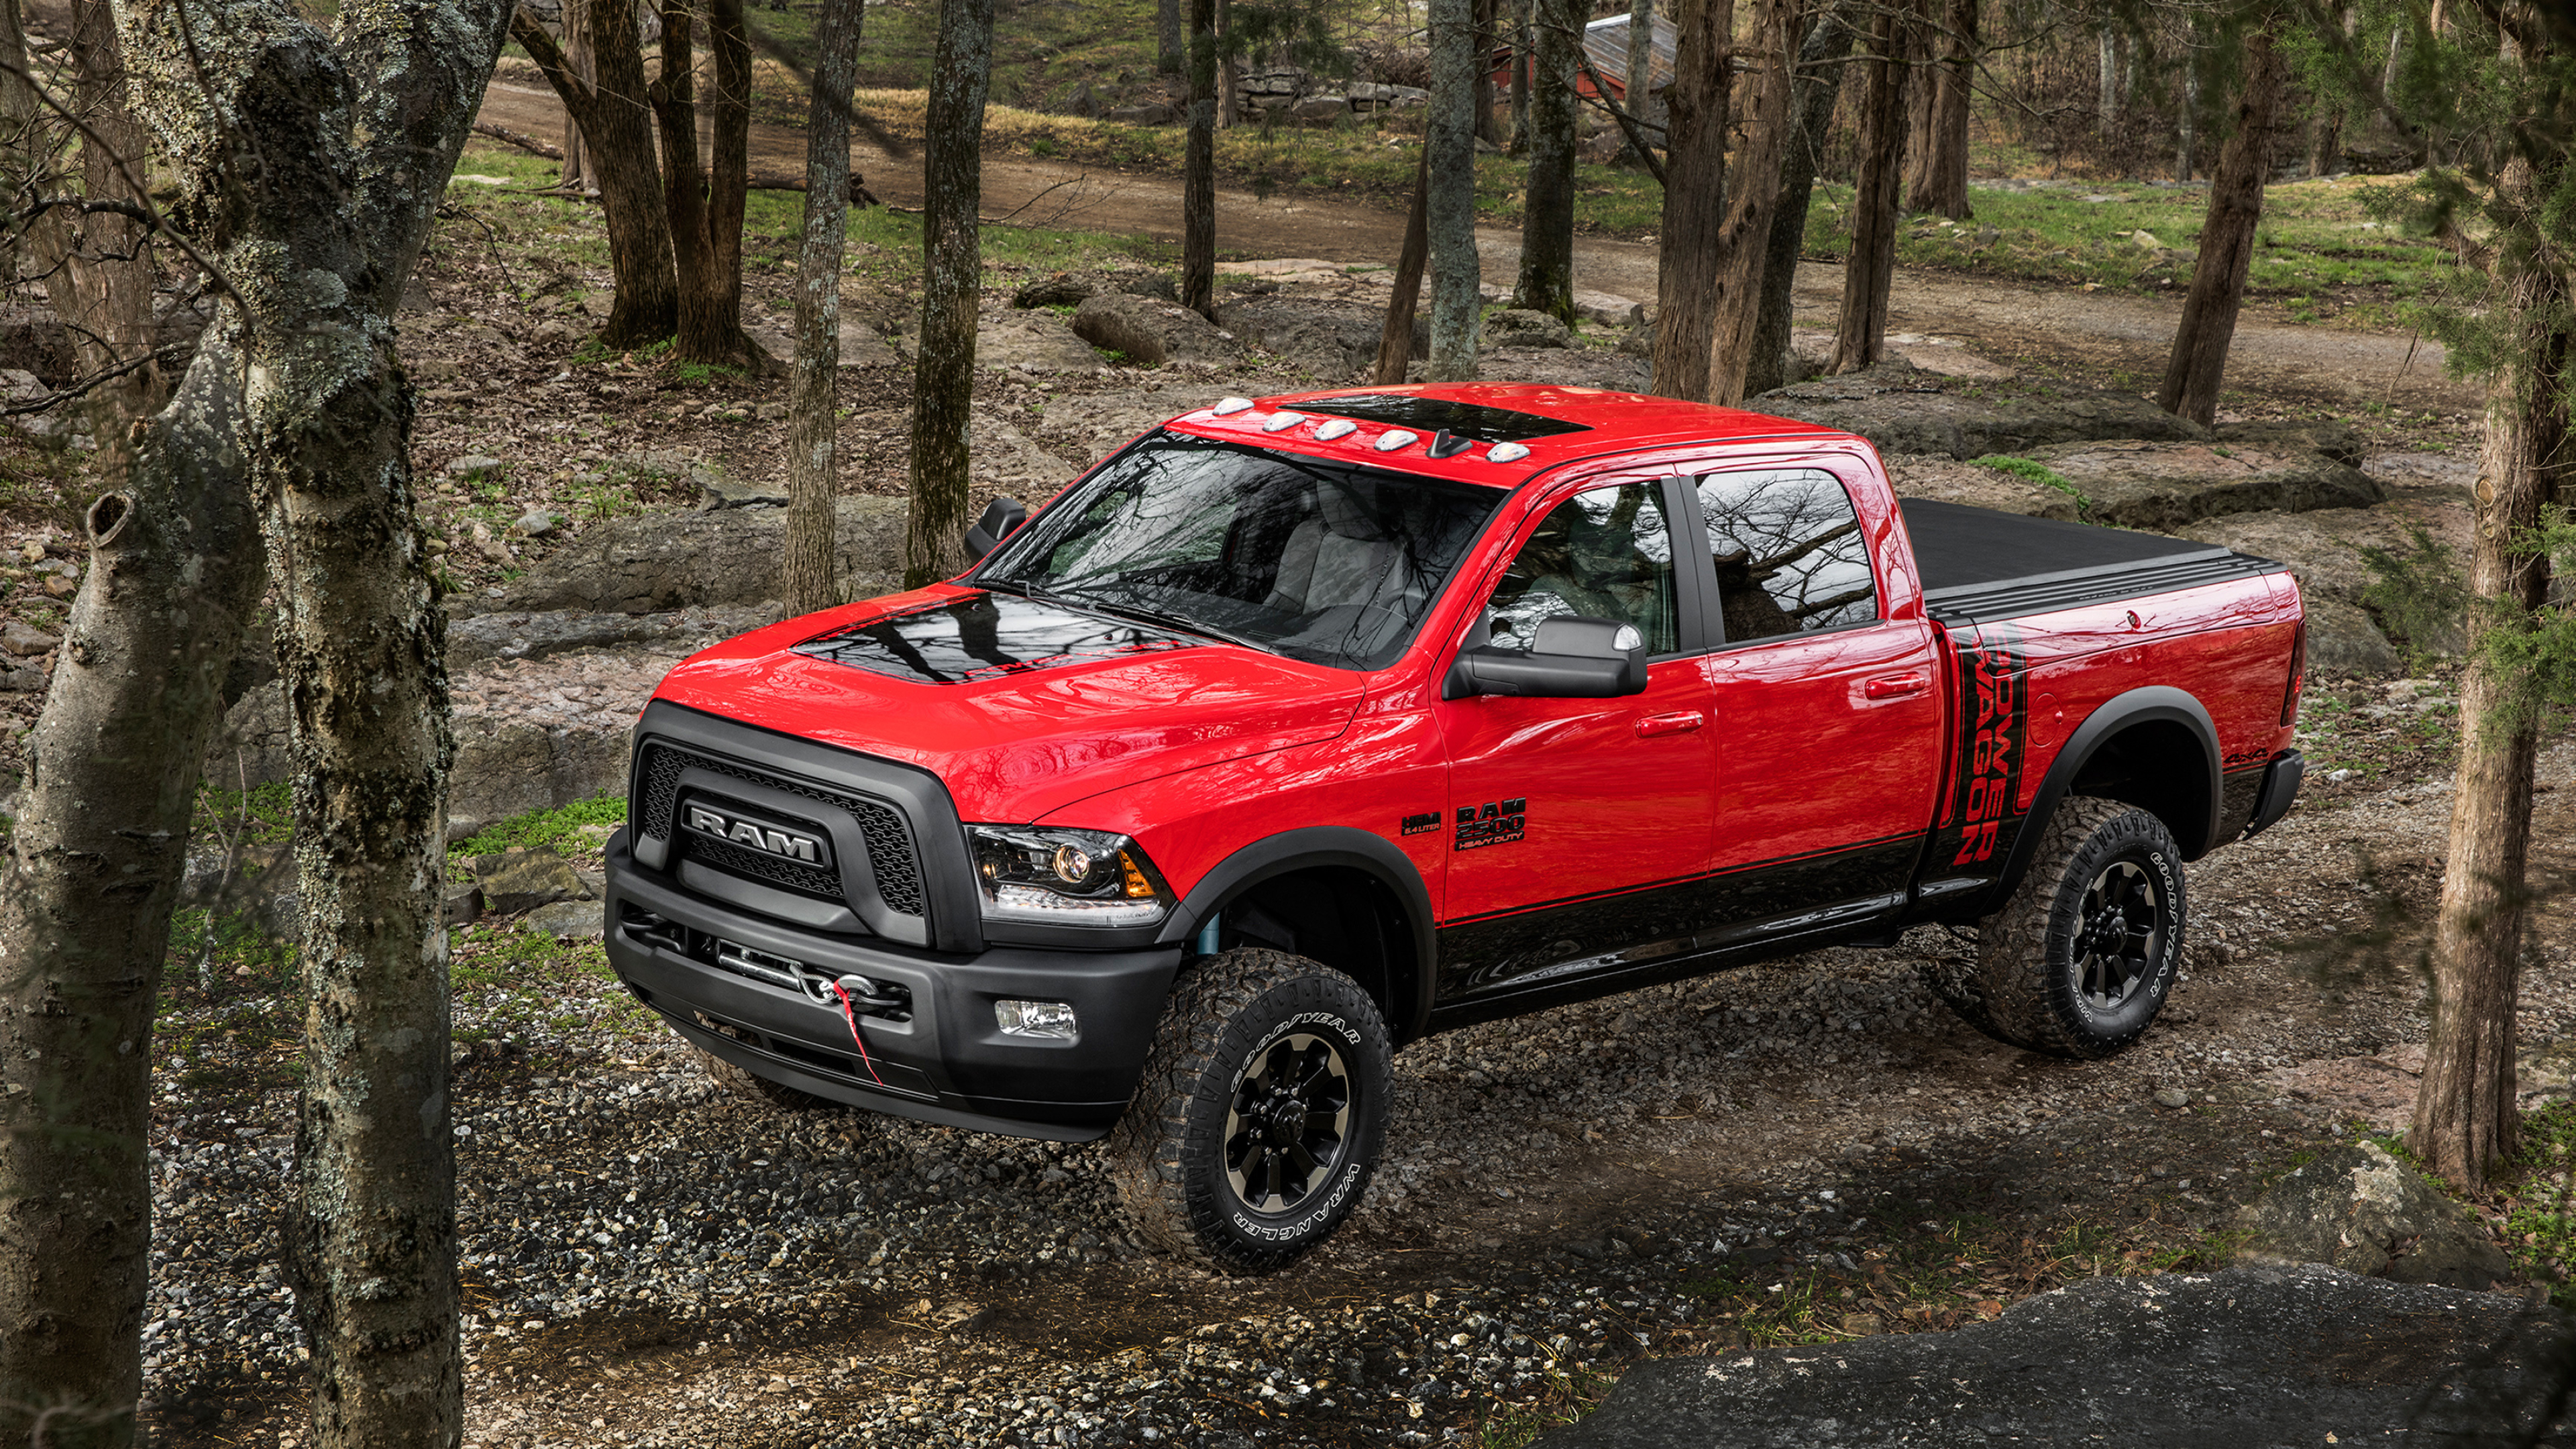 Ram 2500, Power and strength, Off-road capability, Unstoppable force, 3840x2160 4K Desktop